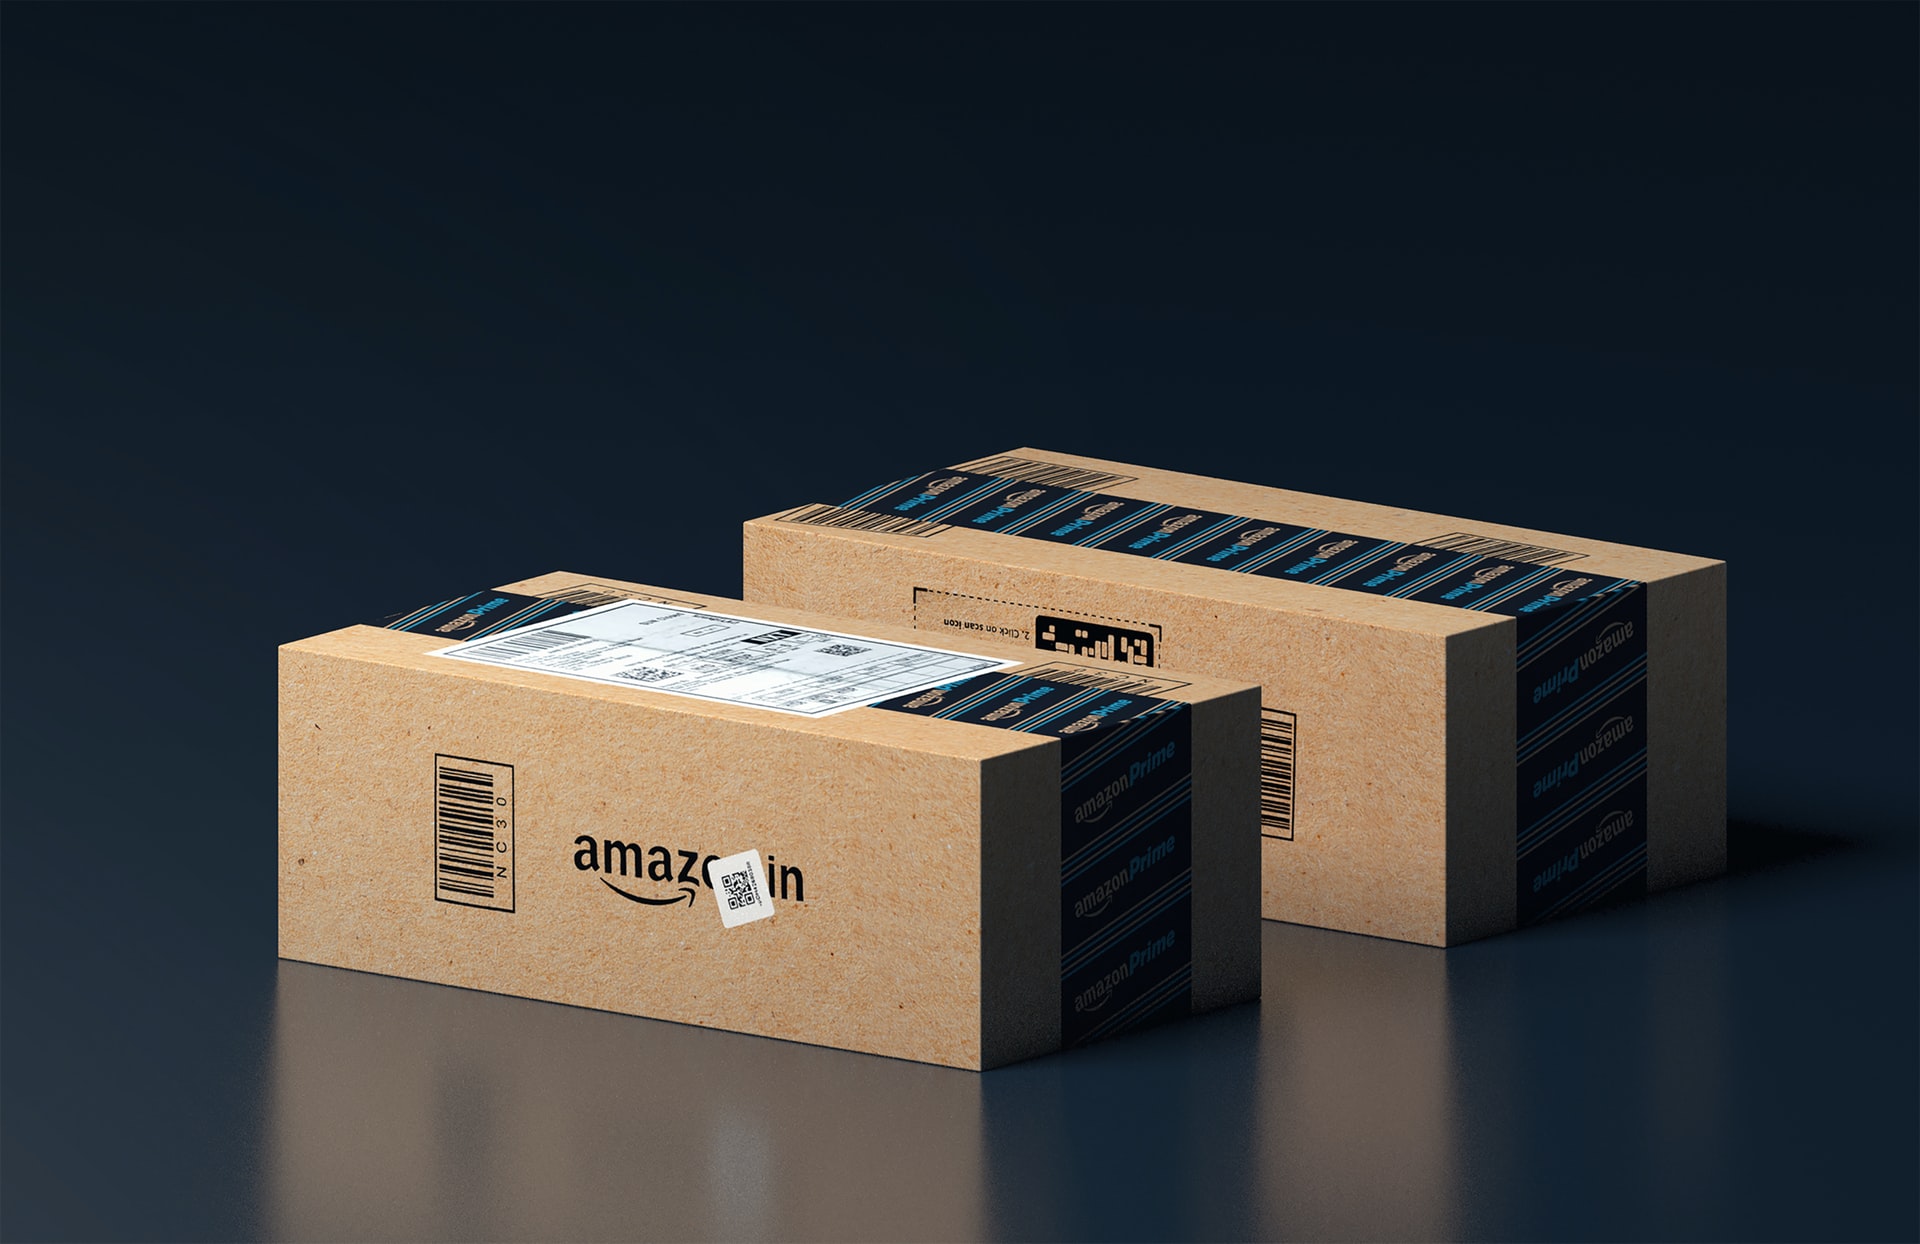 Amazon Warehouse Manager faces a lawsuit and 20 years in prison for stealing $273,000 worth of computer parts